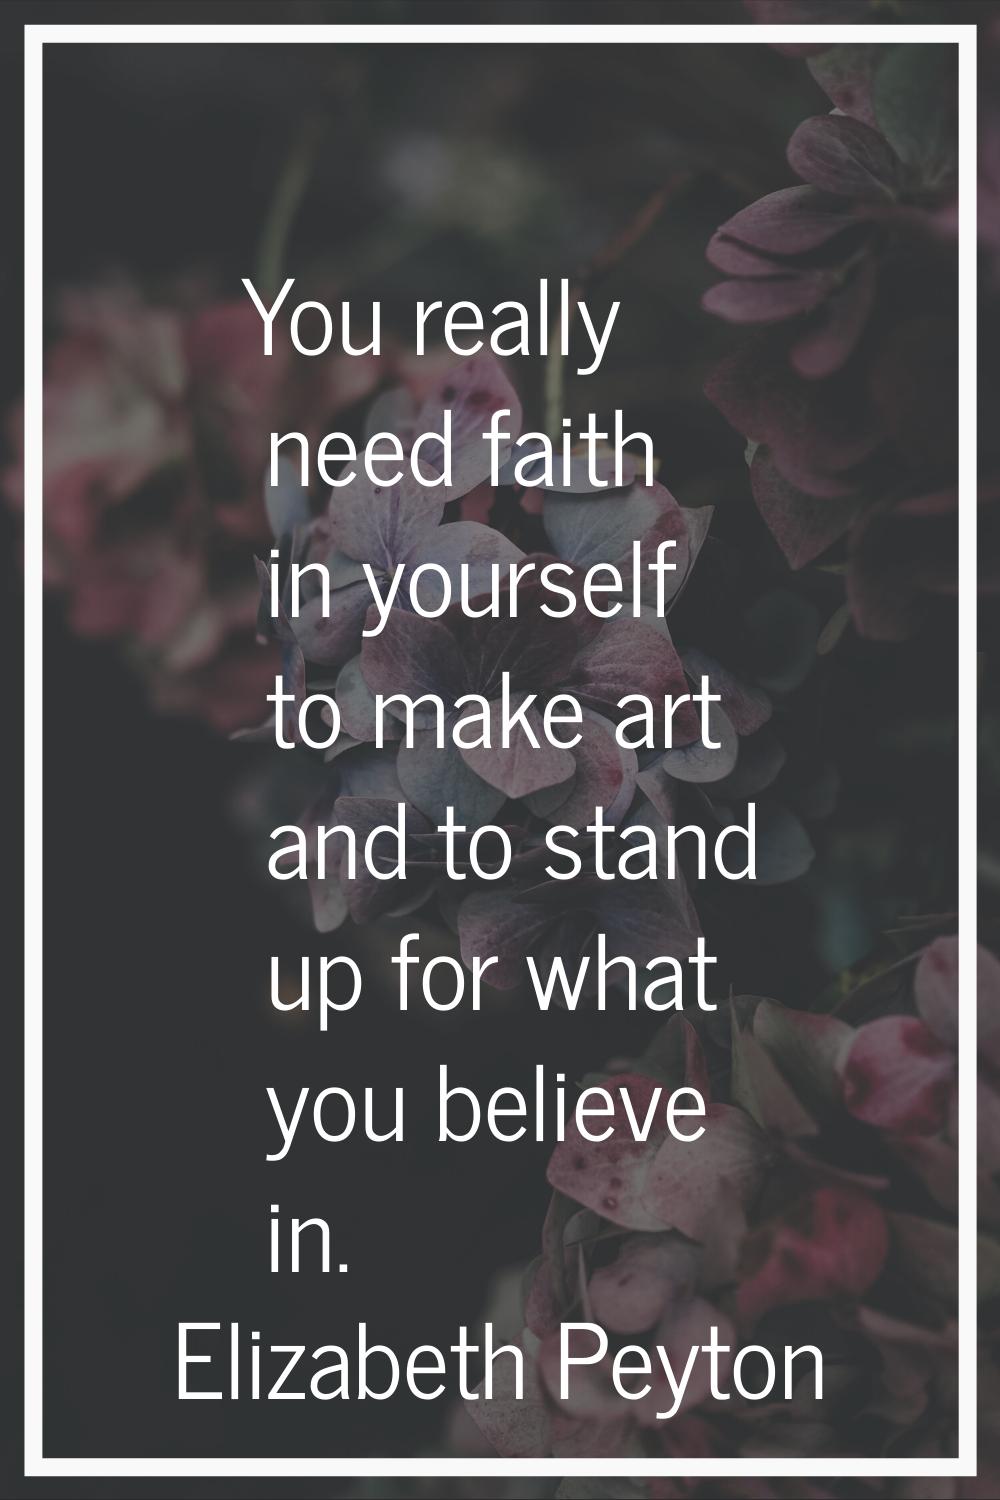 You really need faith in yourself to make art and to stand up for what you believe in.